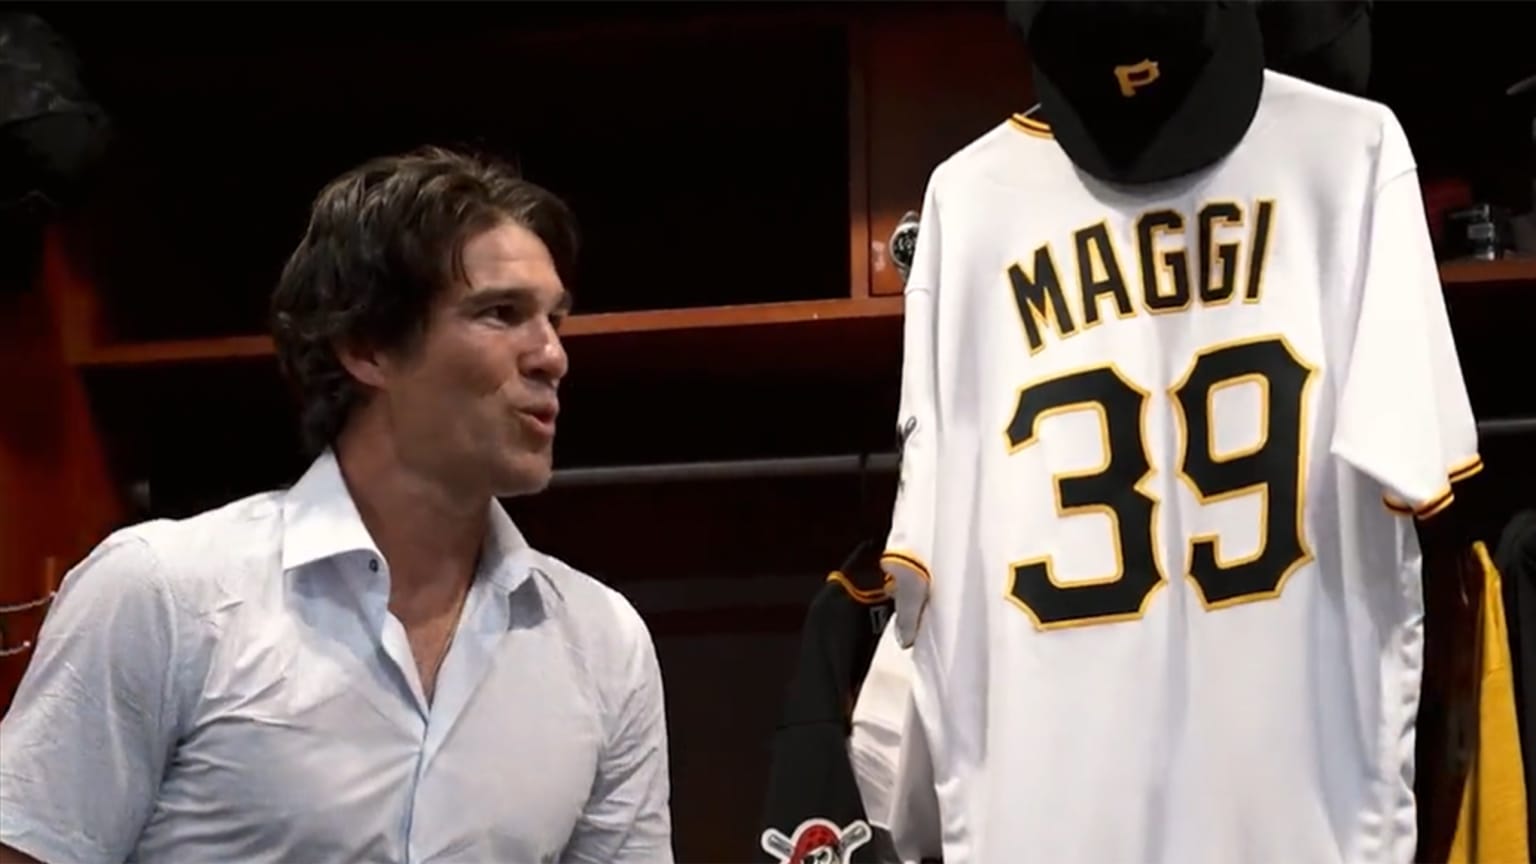 Drew Maggi looks at his Pirates jersey in the clubhouse